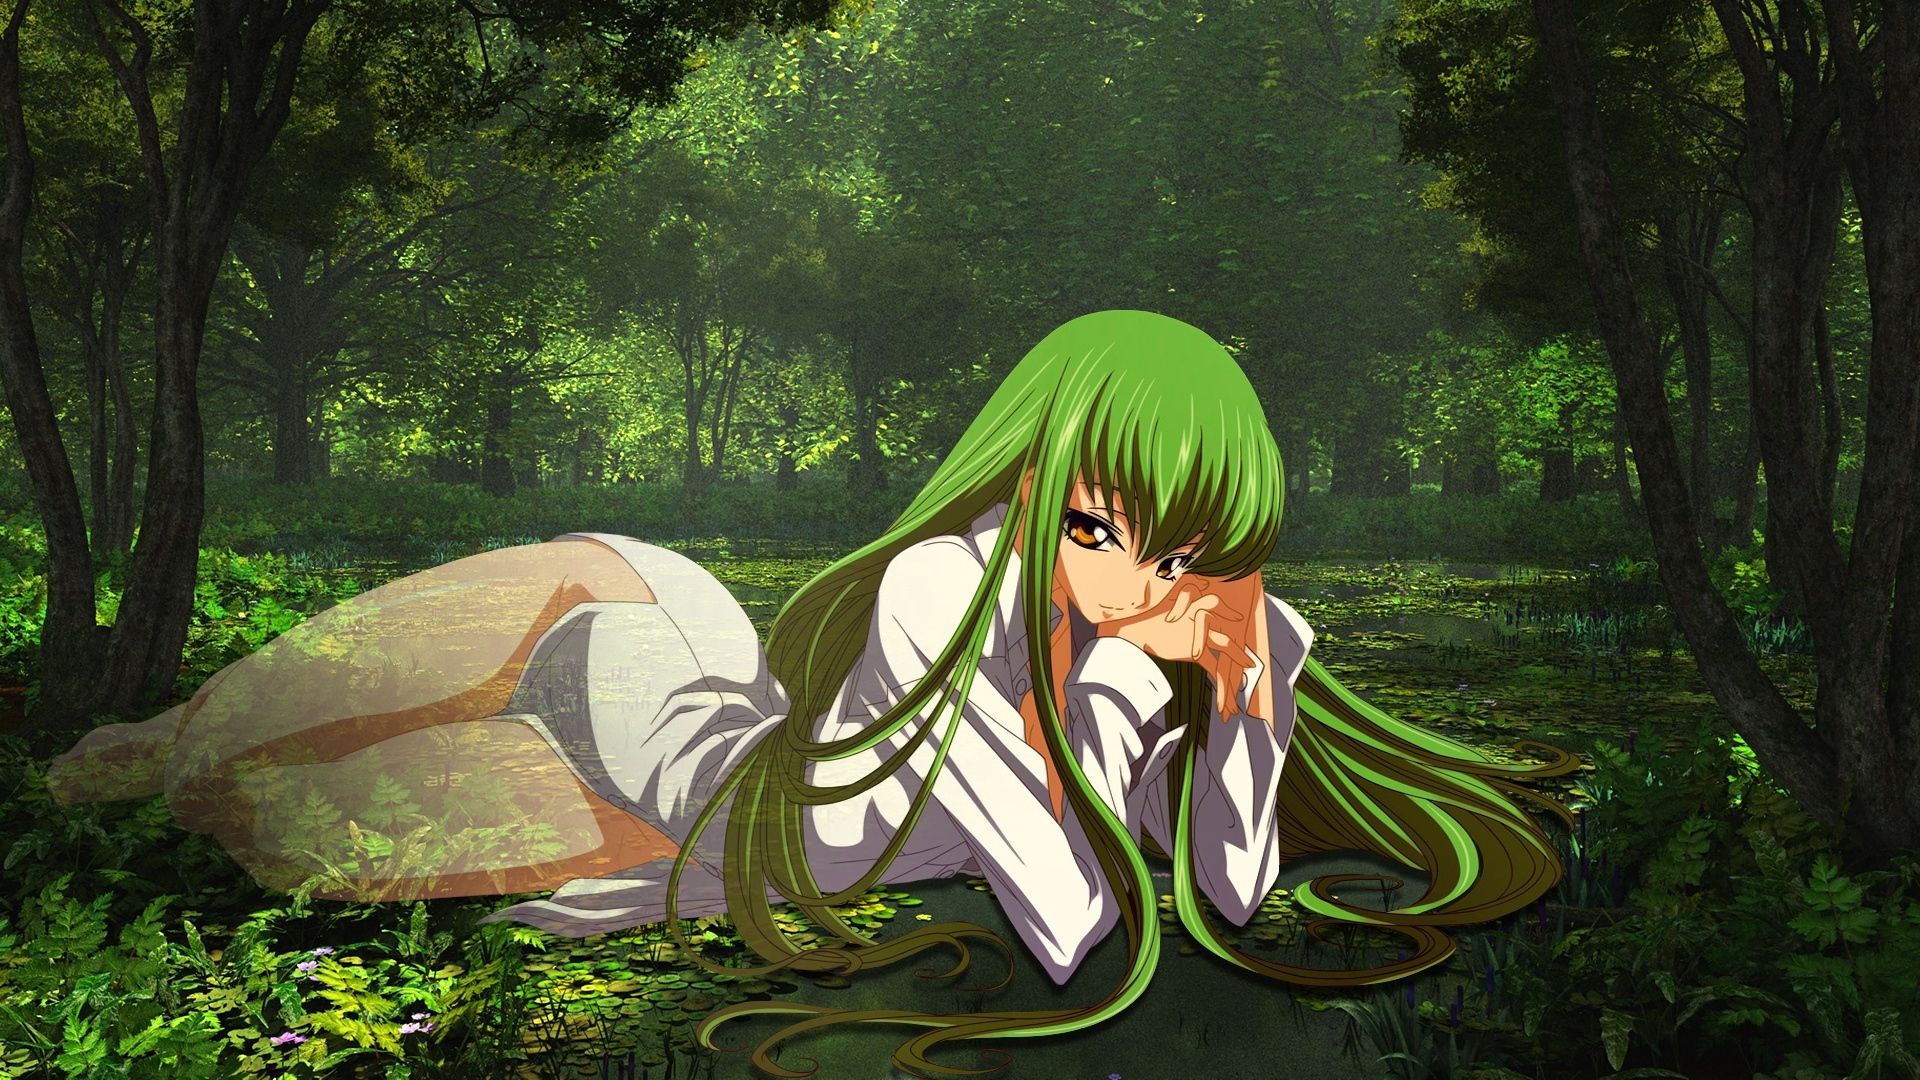 Green Anime Wallpapers - Wallpaper Cave